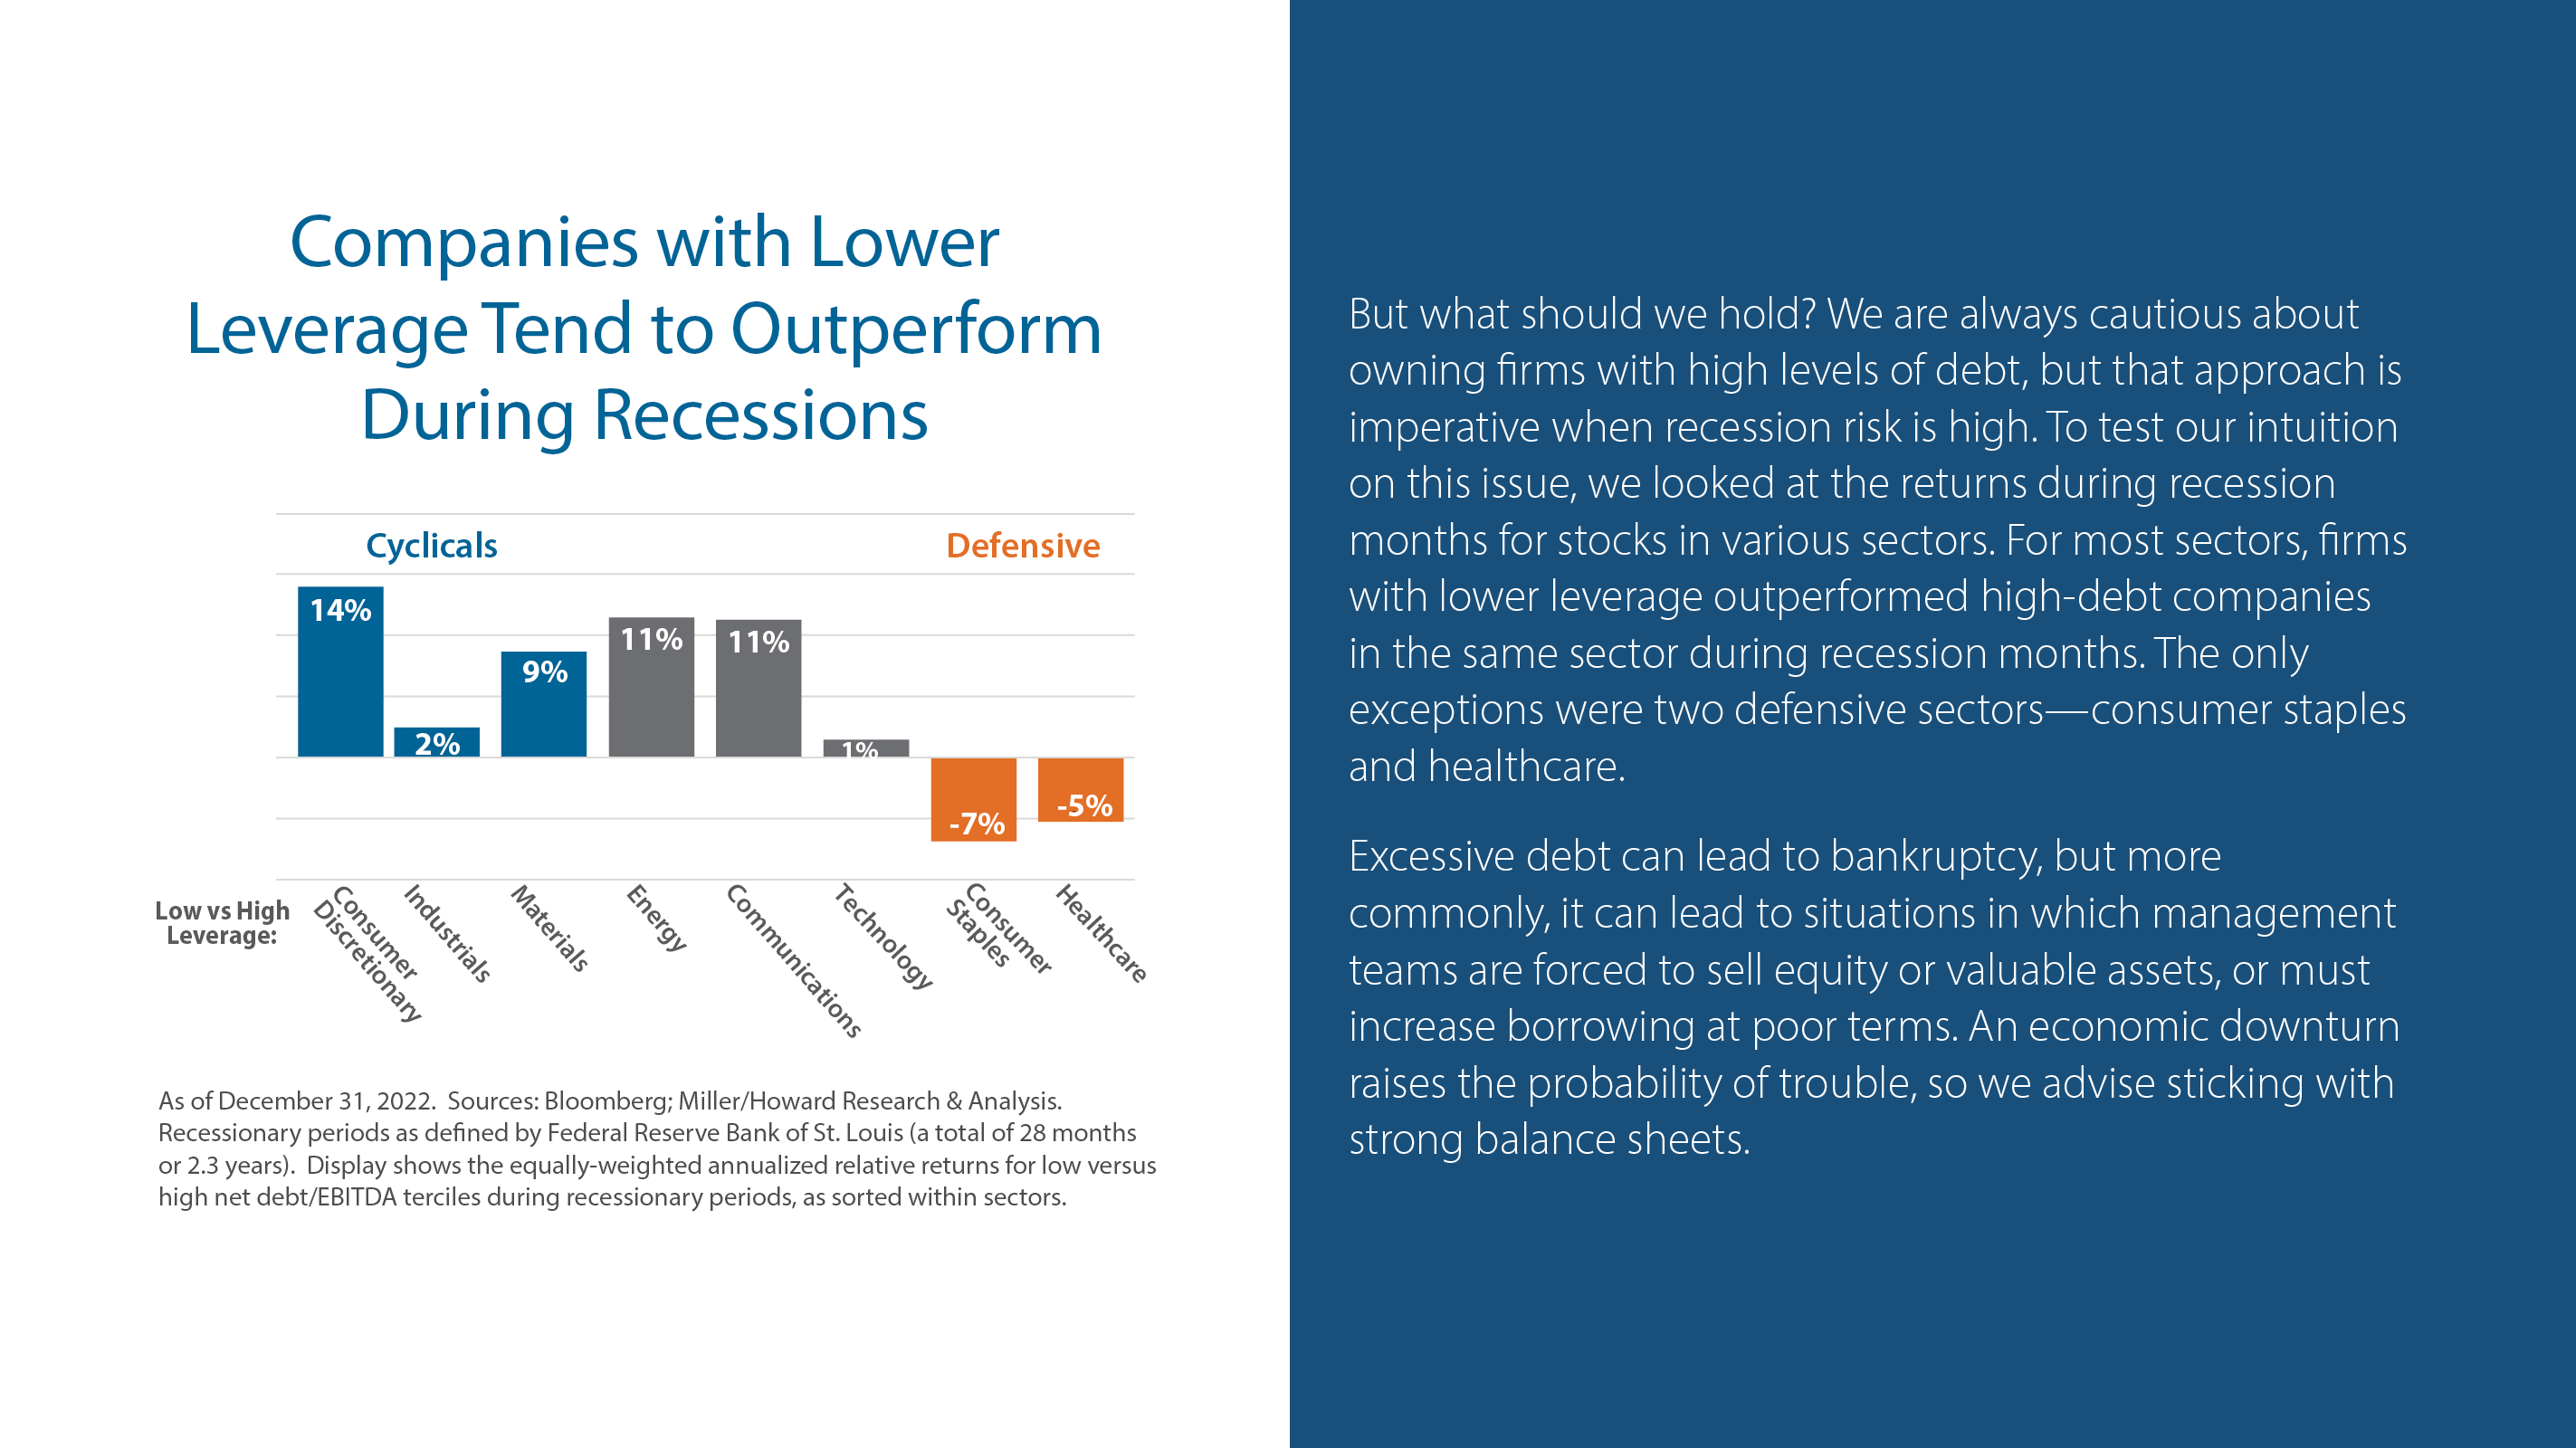 Companies with Lower Leverage Tend to Outperform During Recessions